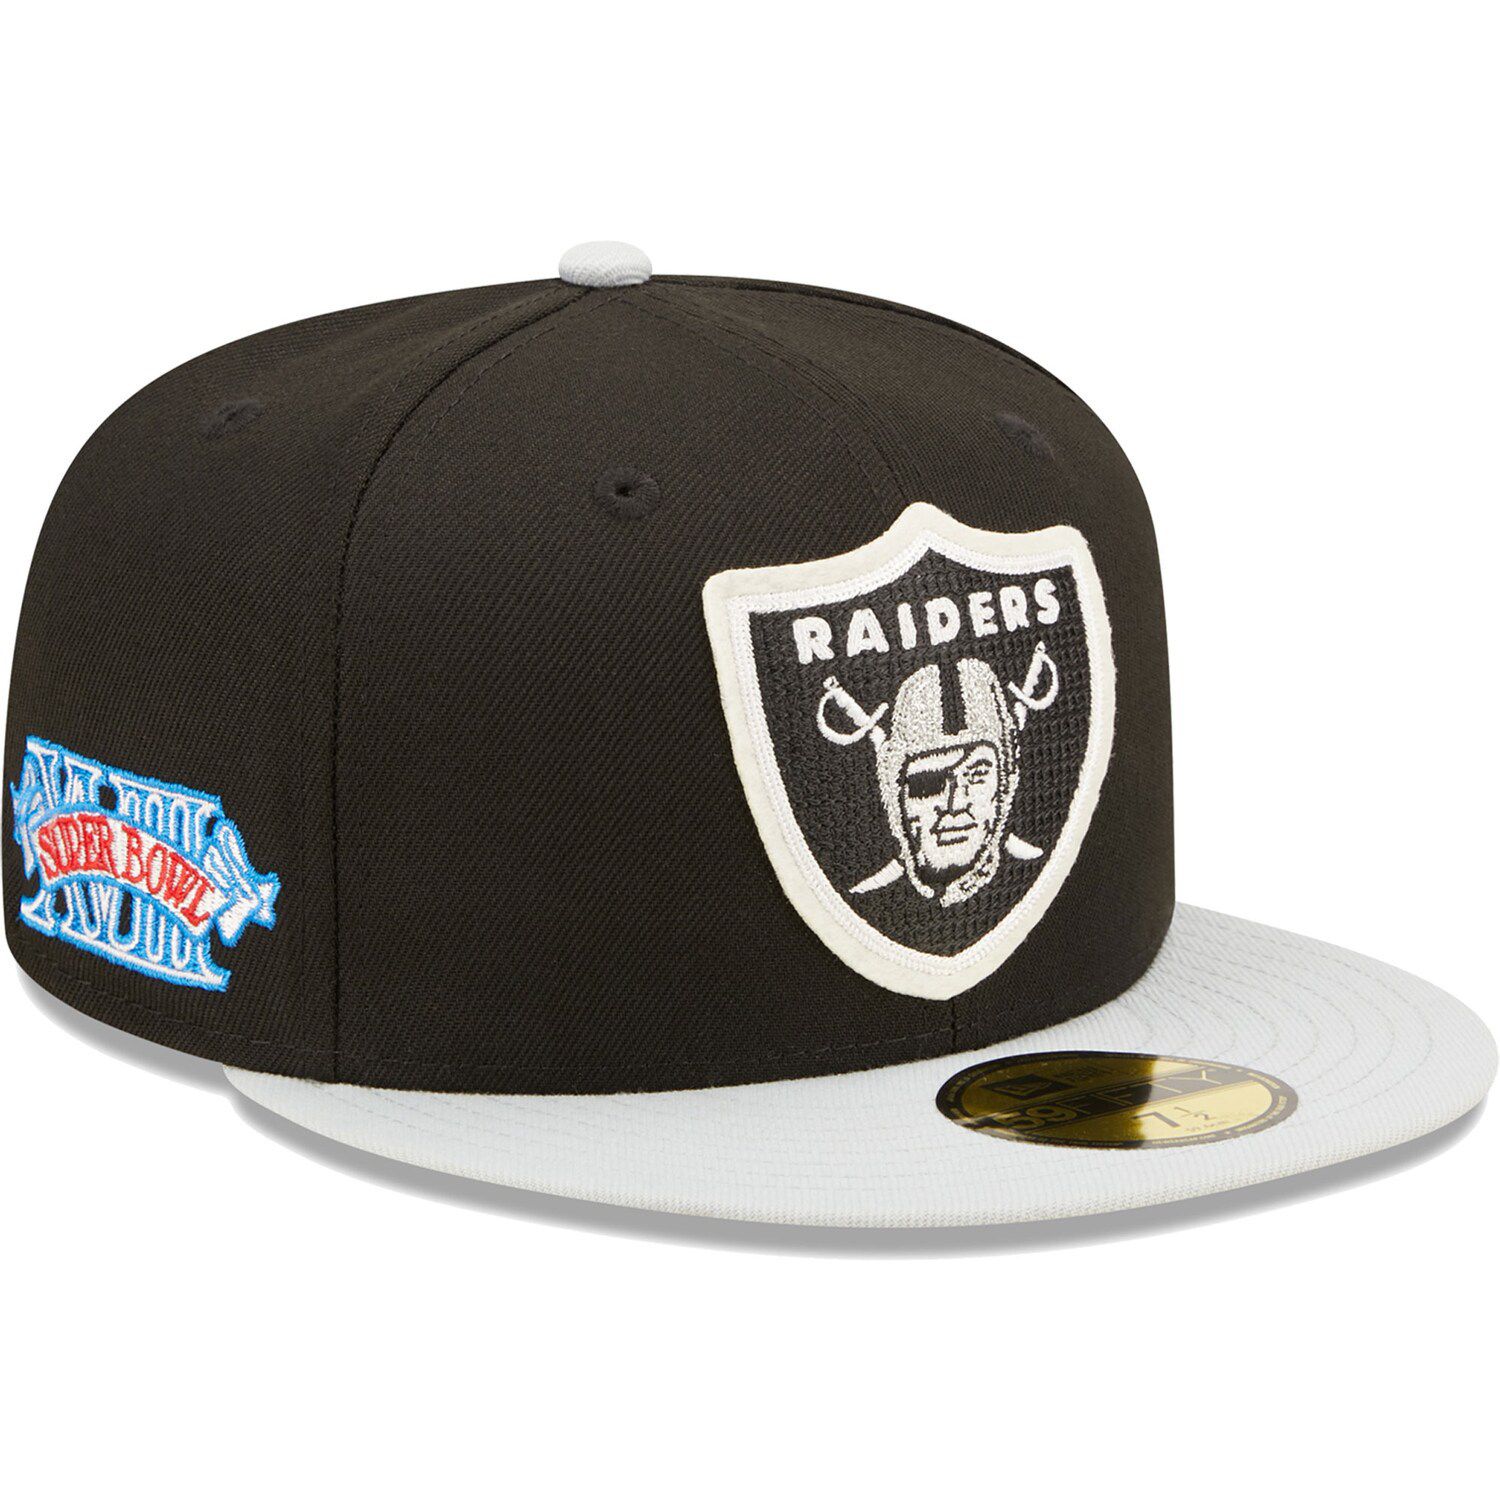 New Era Caps Las Vegas Raiders 59FIFTY Fitted Hat Chrome Silver